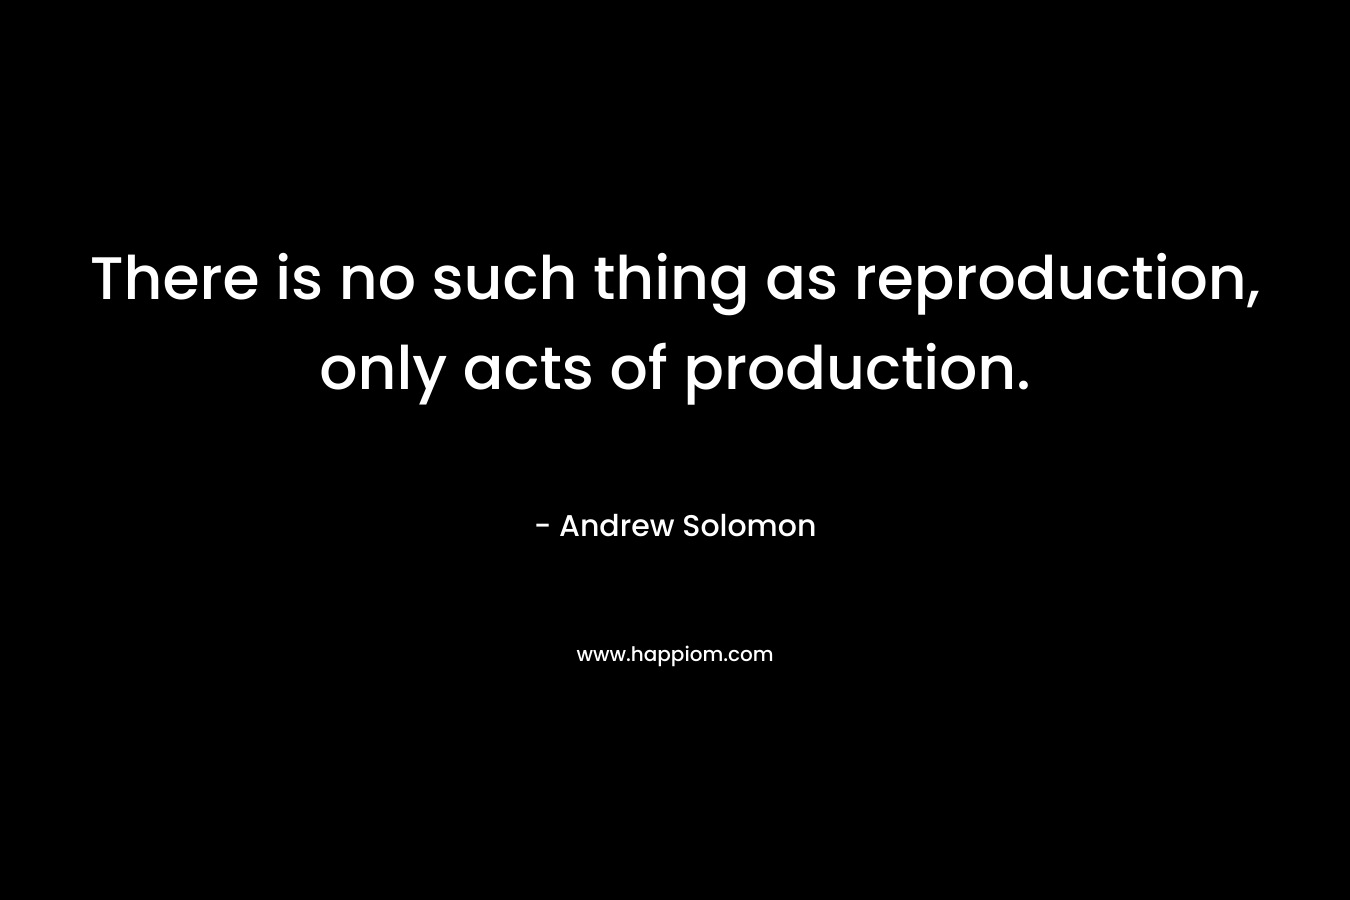 There is no such thing as reproduction, only acts of production. – Andrew Solomon